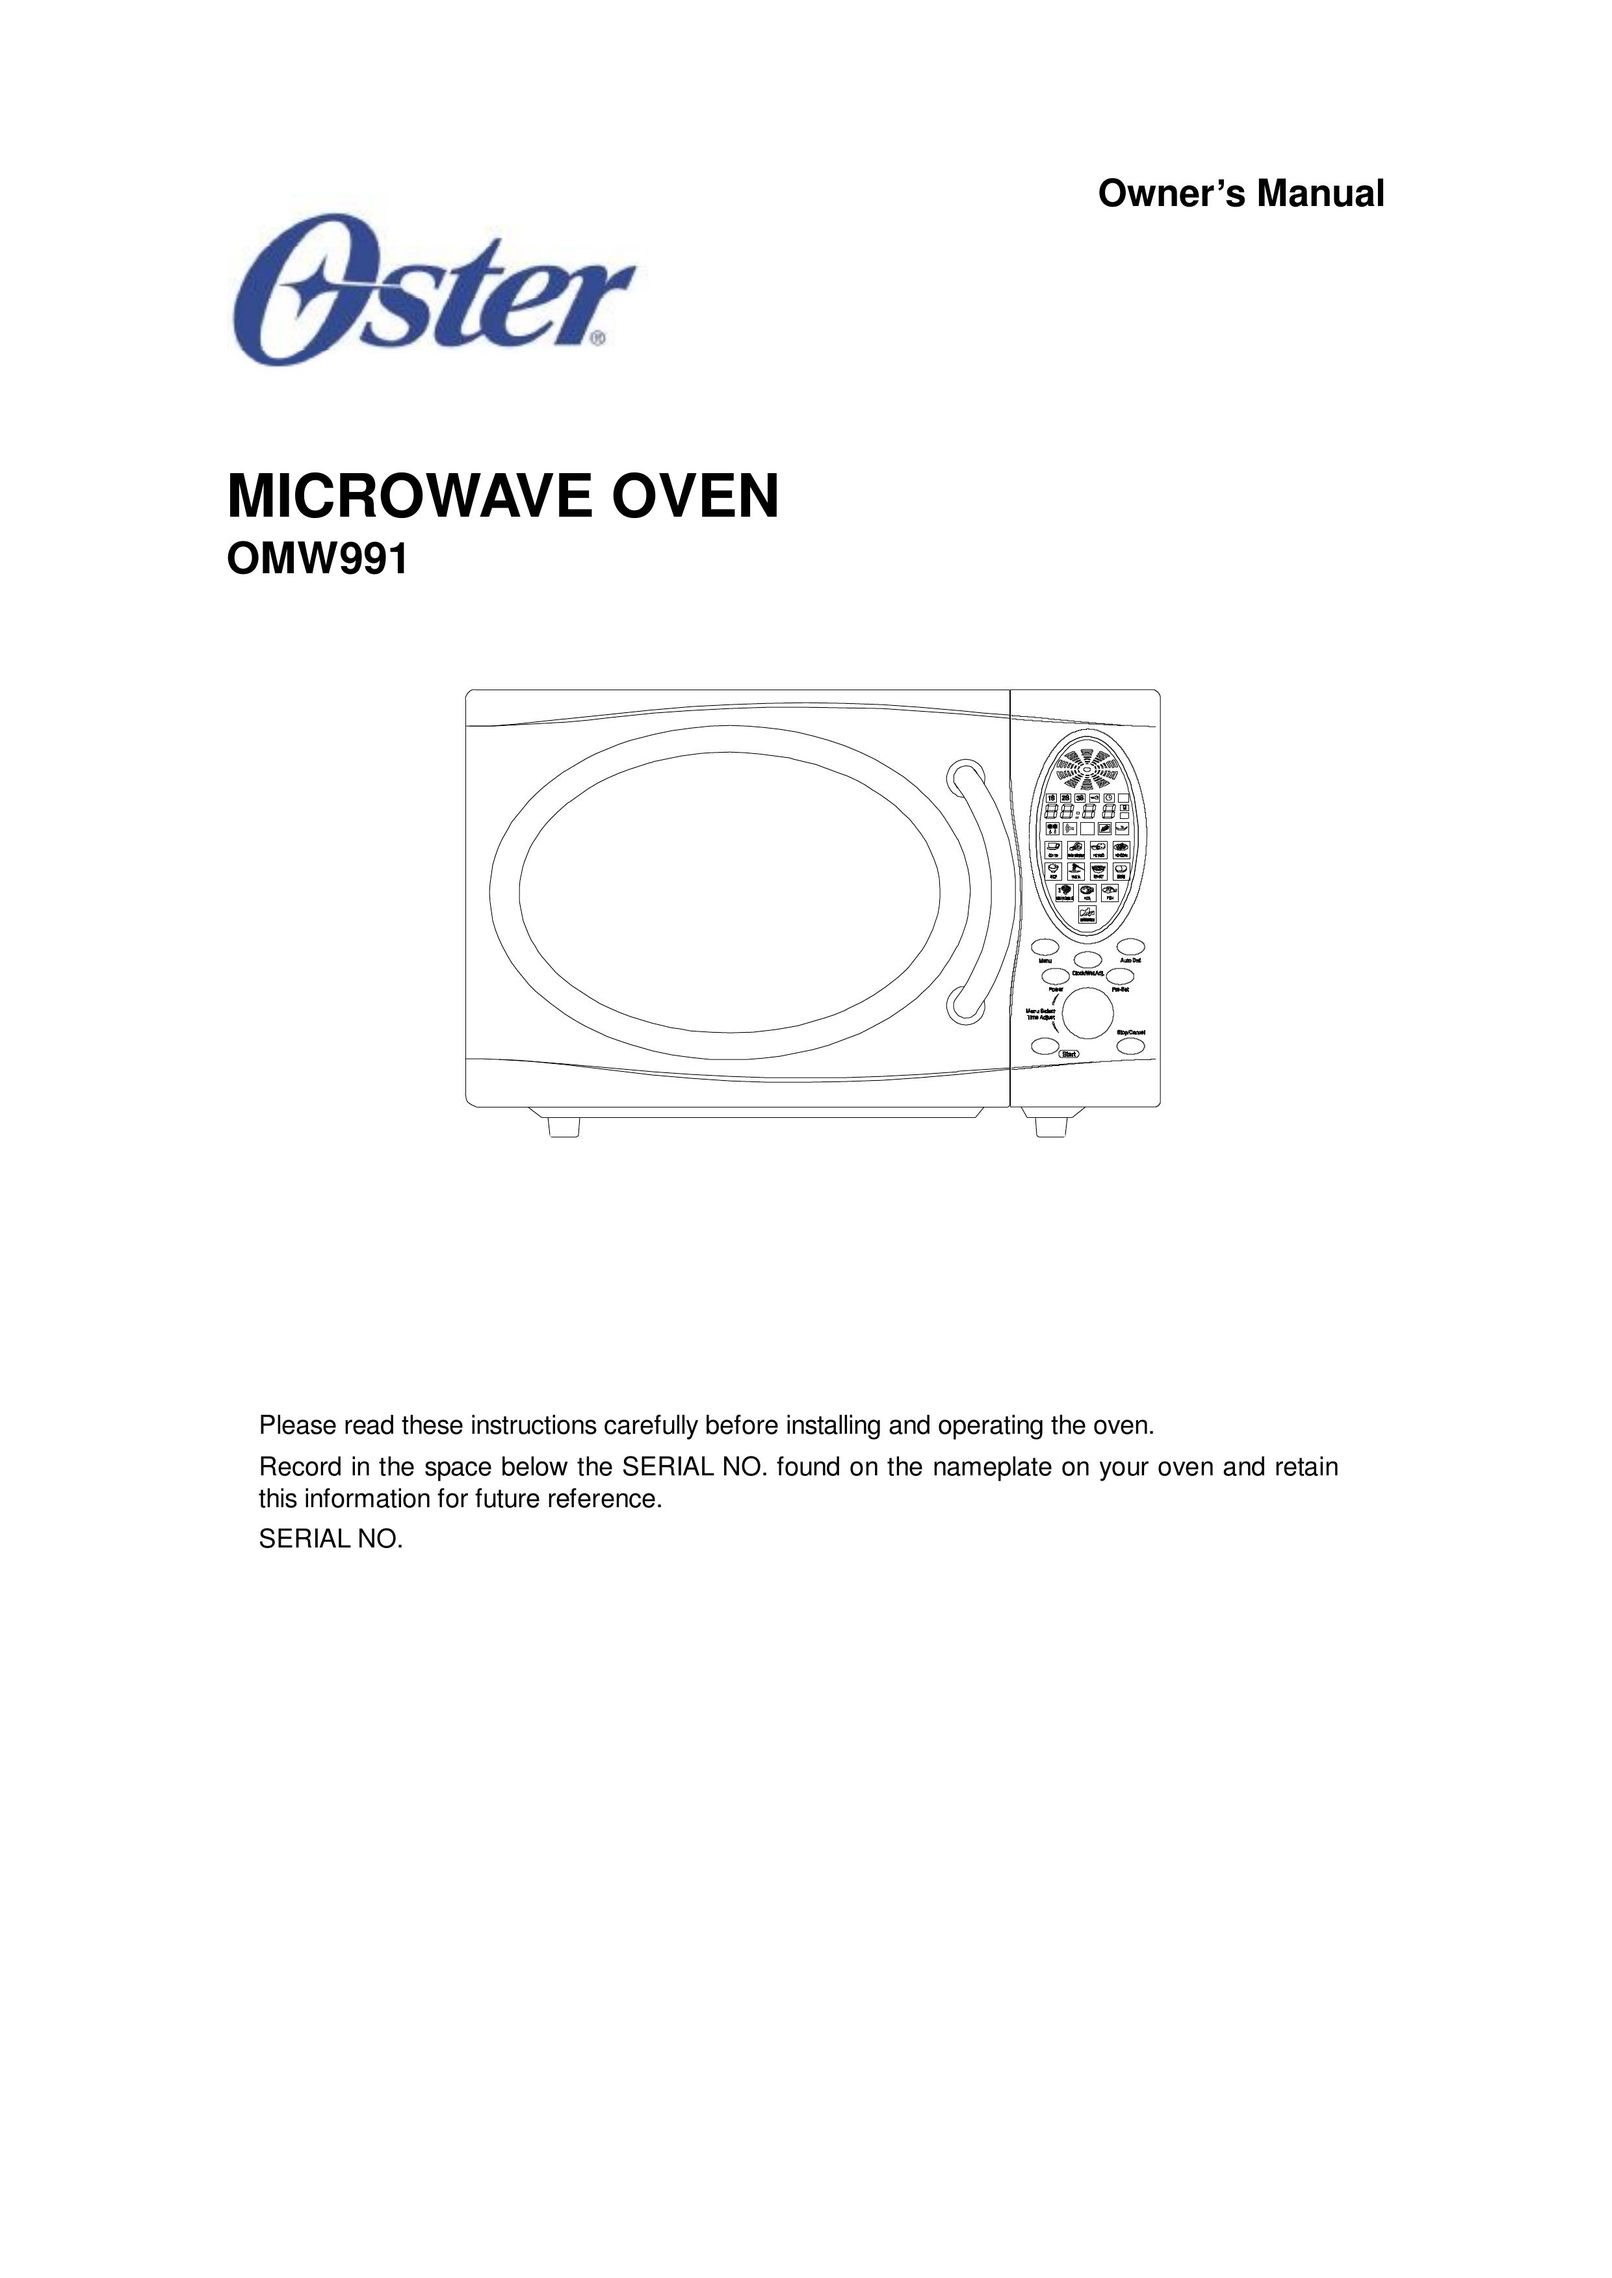 Oster OMW991 Microwave Oven User Manual